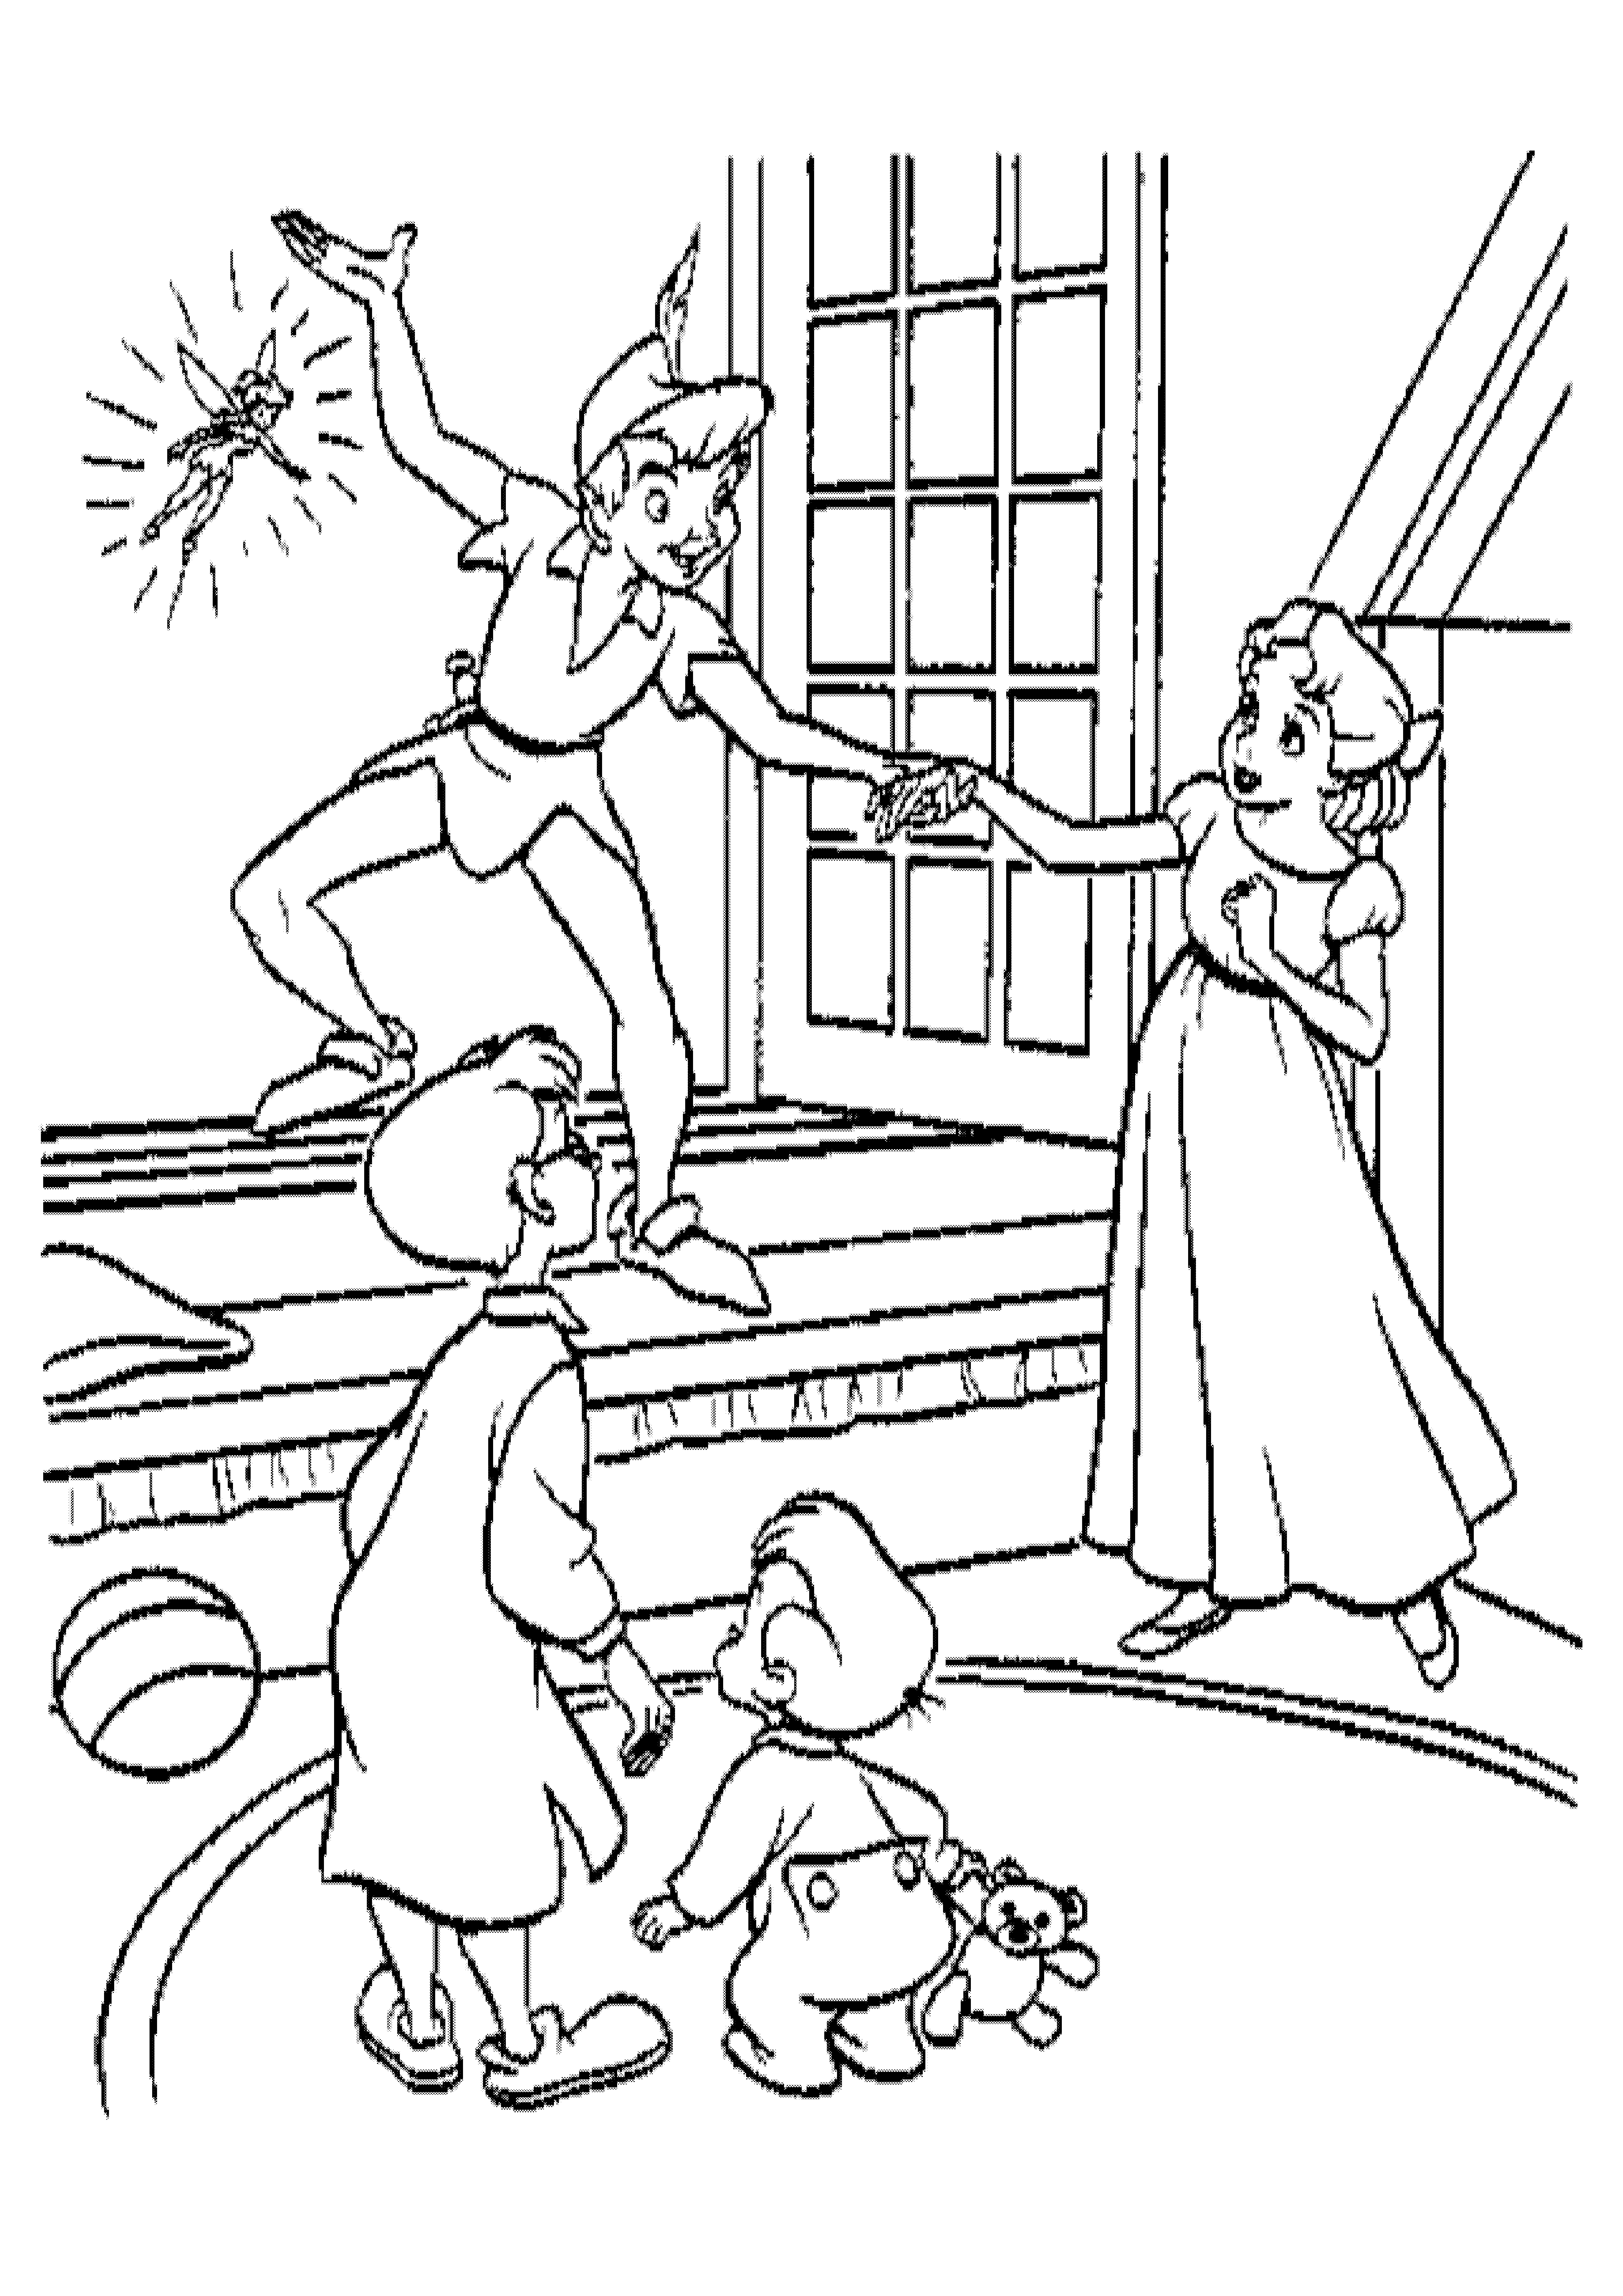 Coloriages Peter Pan Peter Pan Coloring Pages Disney Coloring Pages